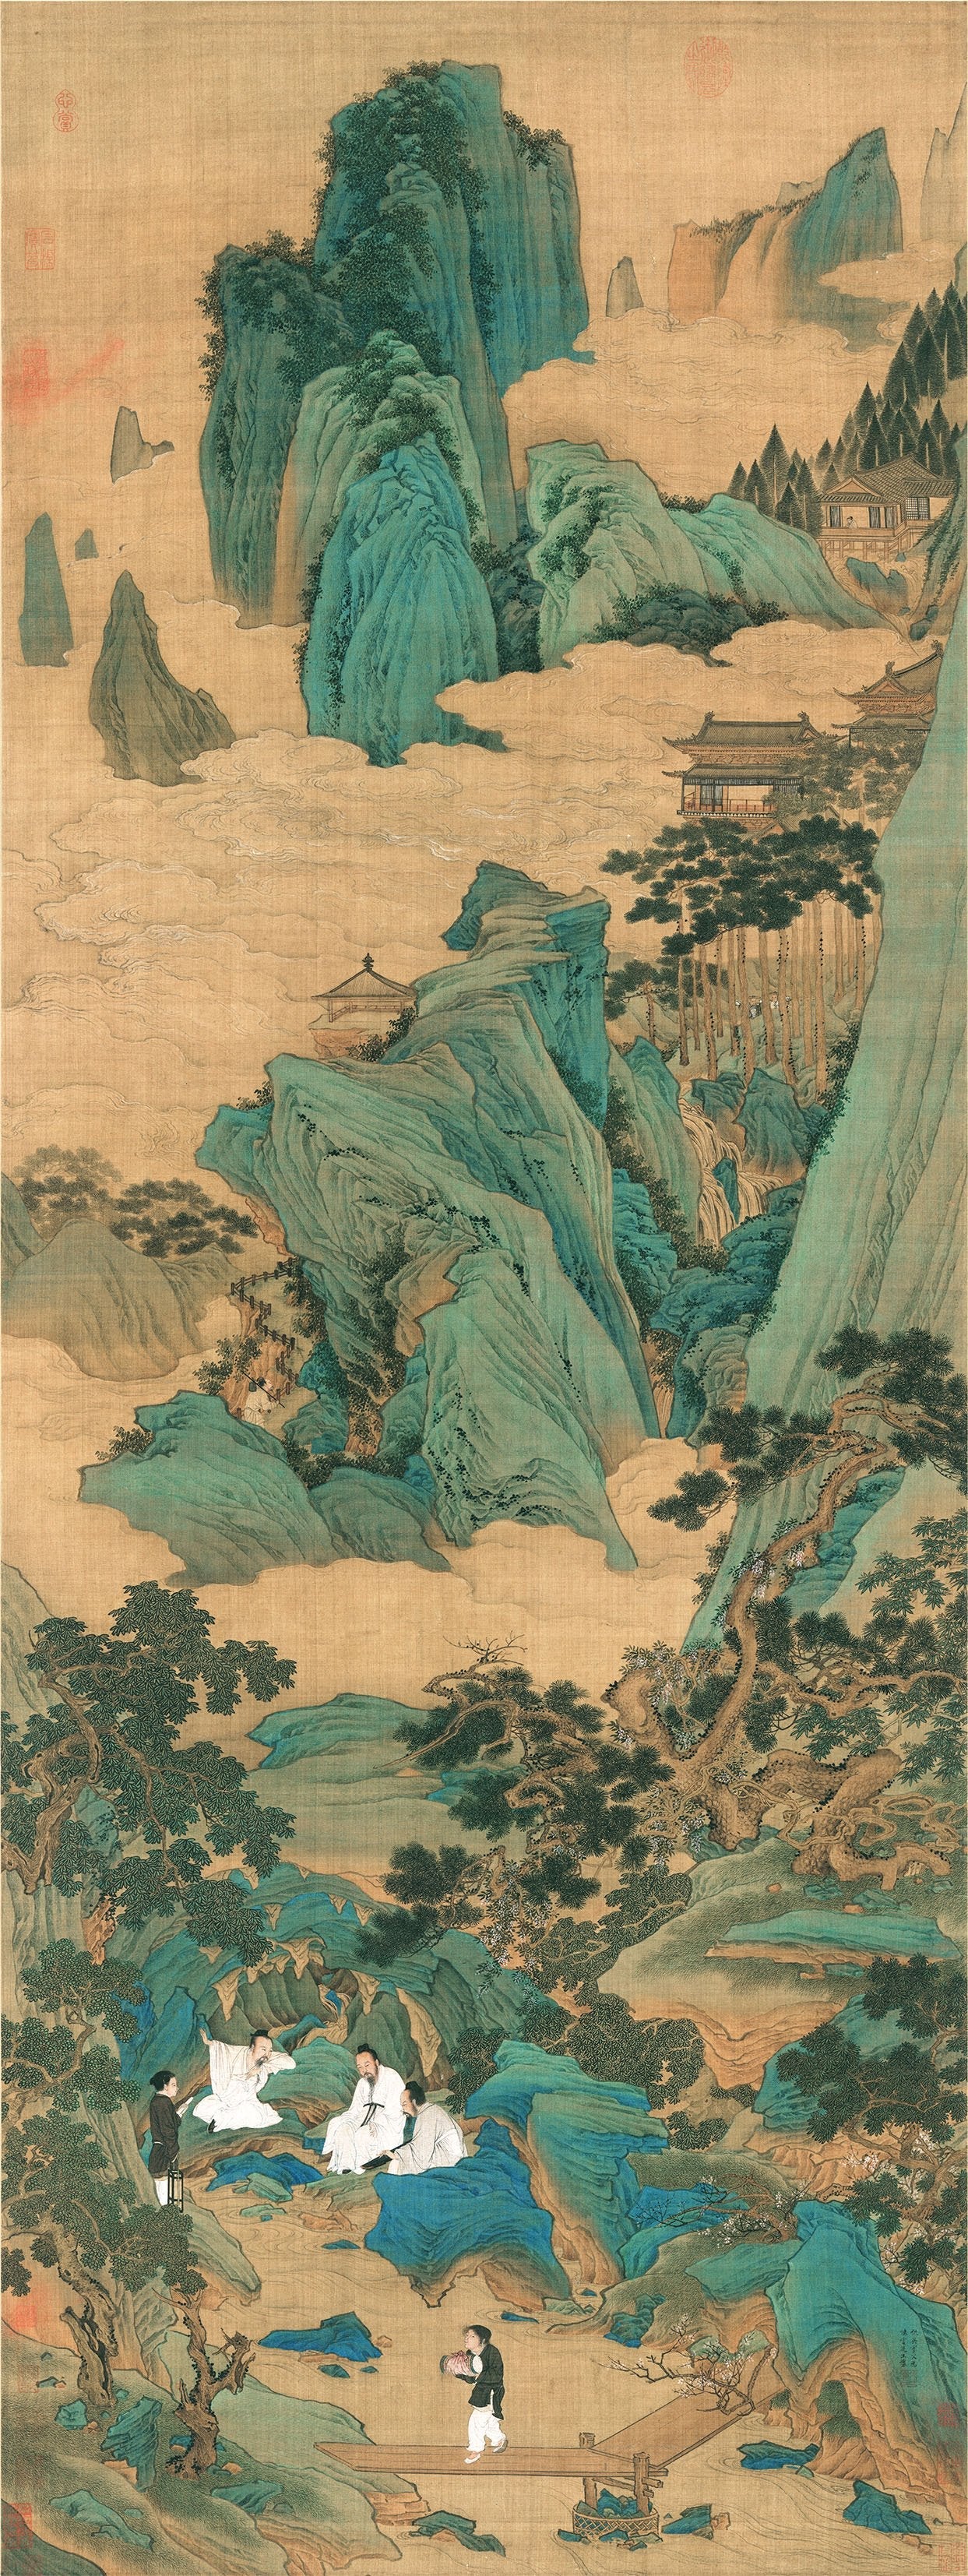 Chinese Antique Art Painting 明 仇英 桃源仙境图 Ming Qiu Ying Tao Yuan Xian Jing China Ancient Wall Picture Ideas 1760-Chinese Style Finds™